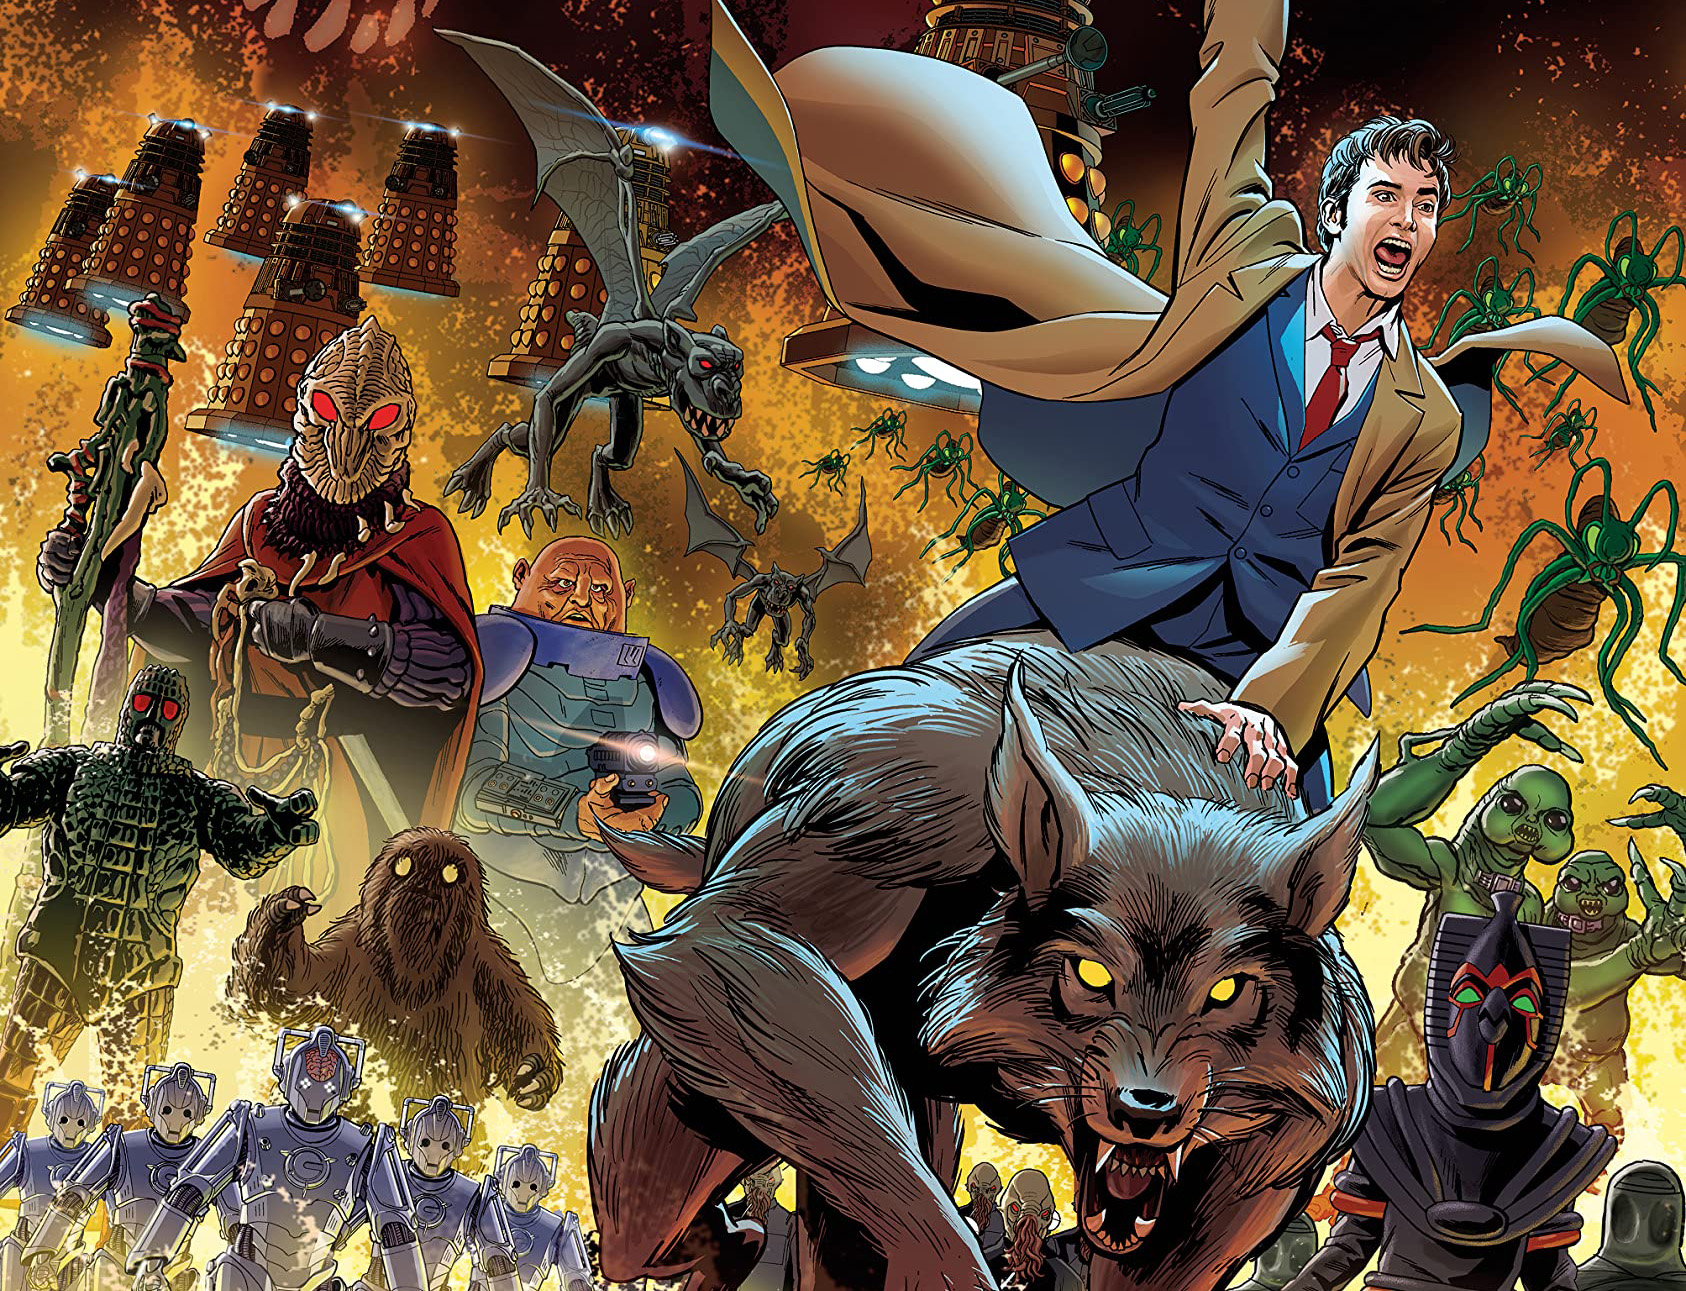 The Tenth Doctor rides a werewolf through a battle featuring his many enemies, in the cover art for Doctor Who: Once Upon a Time Lord.